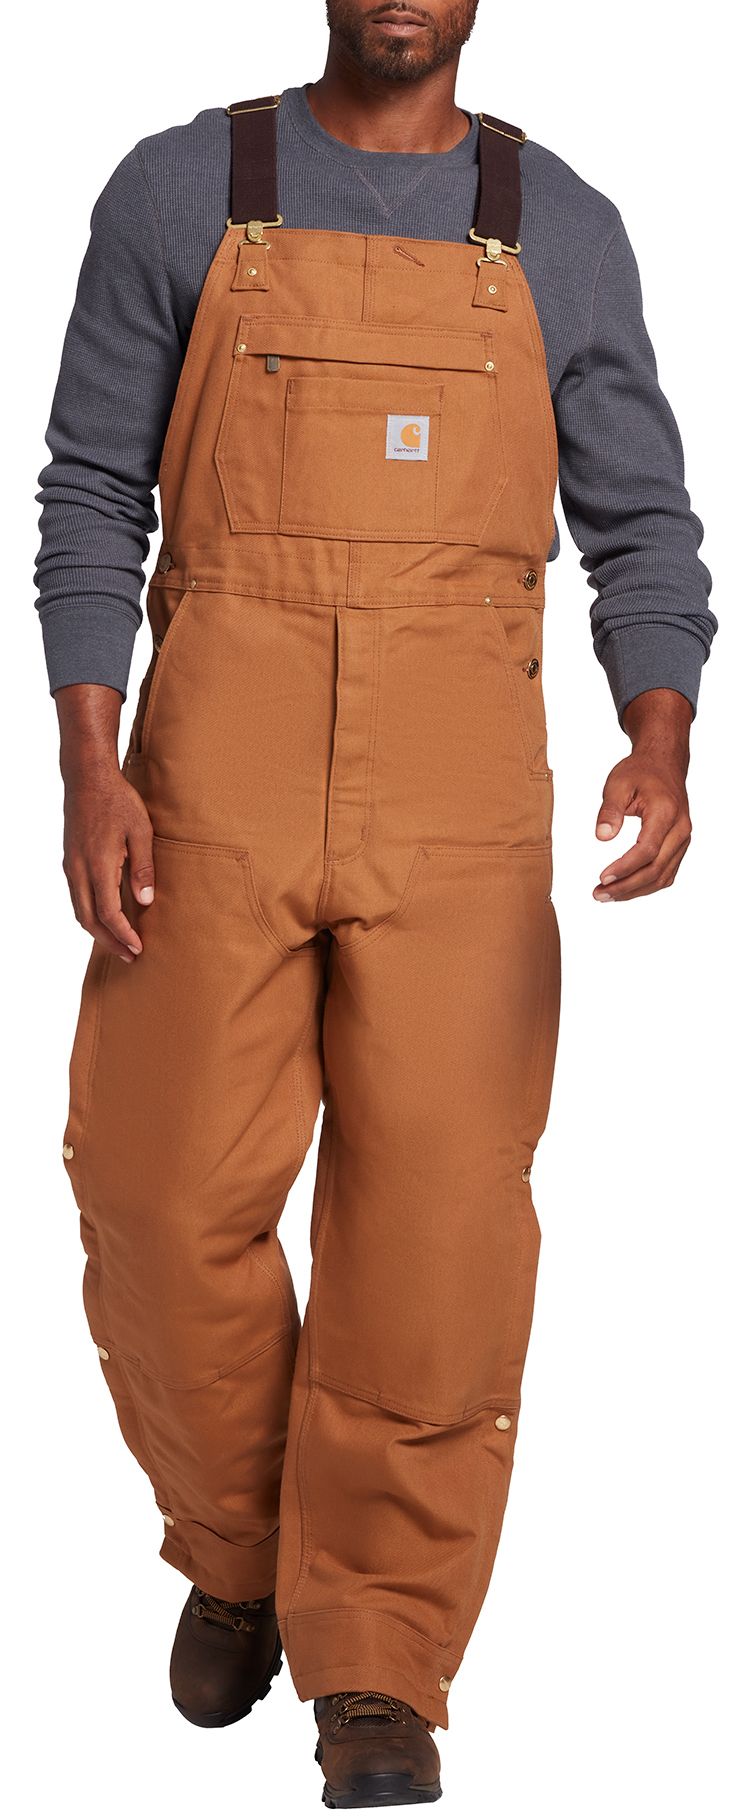 Photos - Ski Wear Carhartt Men's Loose Fit Firm Duck Insulated Bib Overalls, MS,  Br 